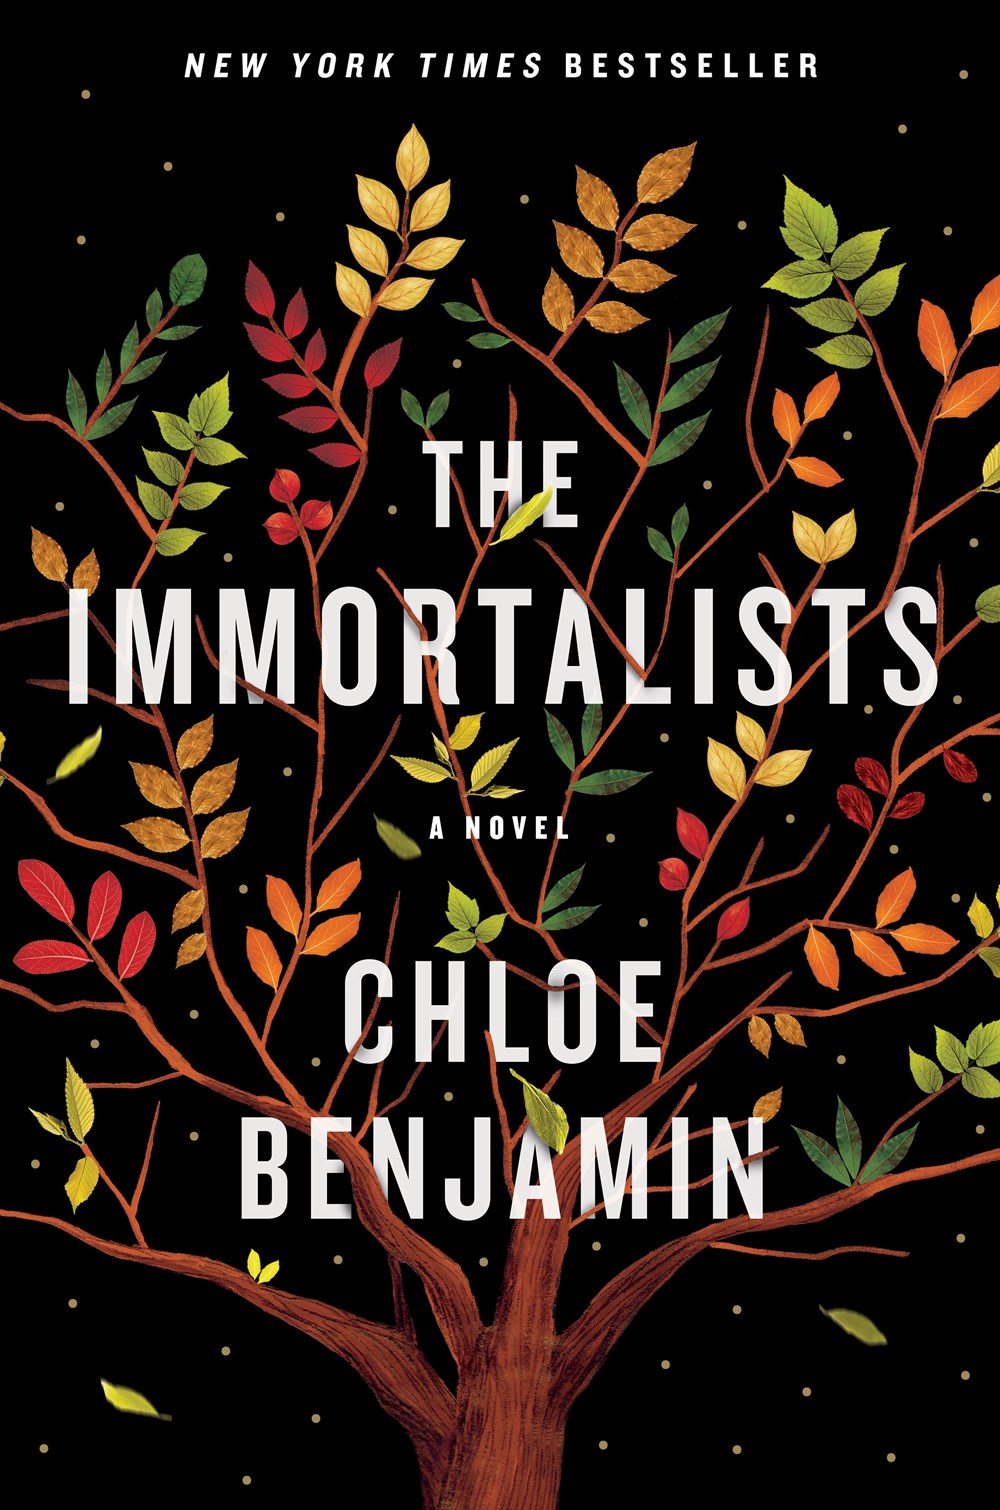 Image for "The Immortalists"